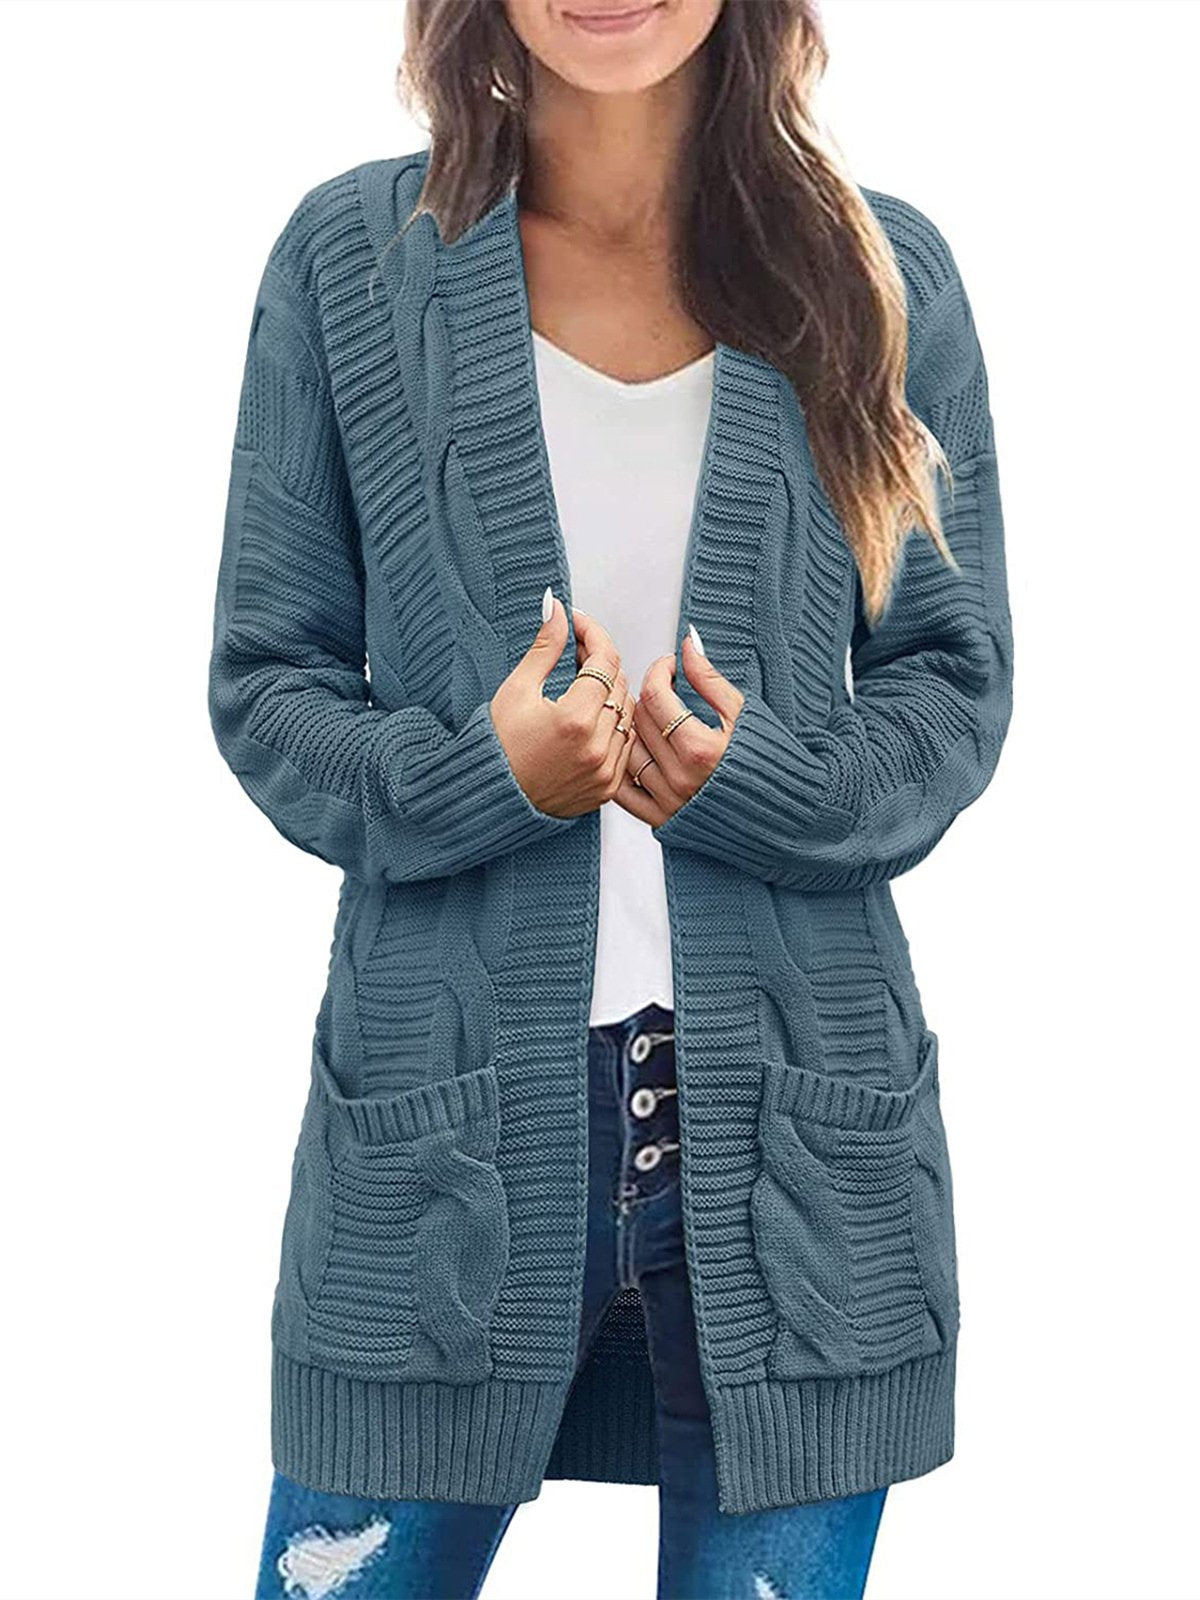 2021 Women's Long Sleeve Cable Knit Cardigan Sweaters-Move Position